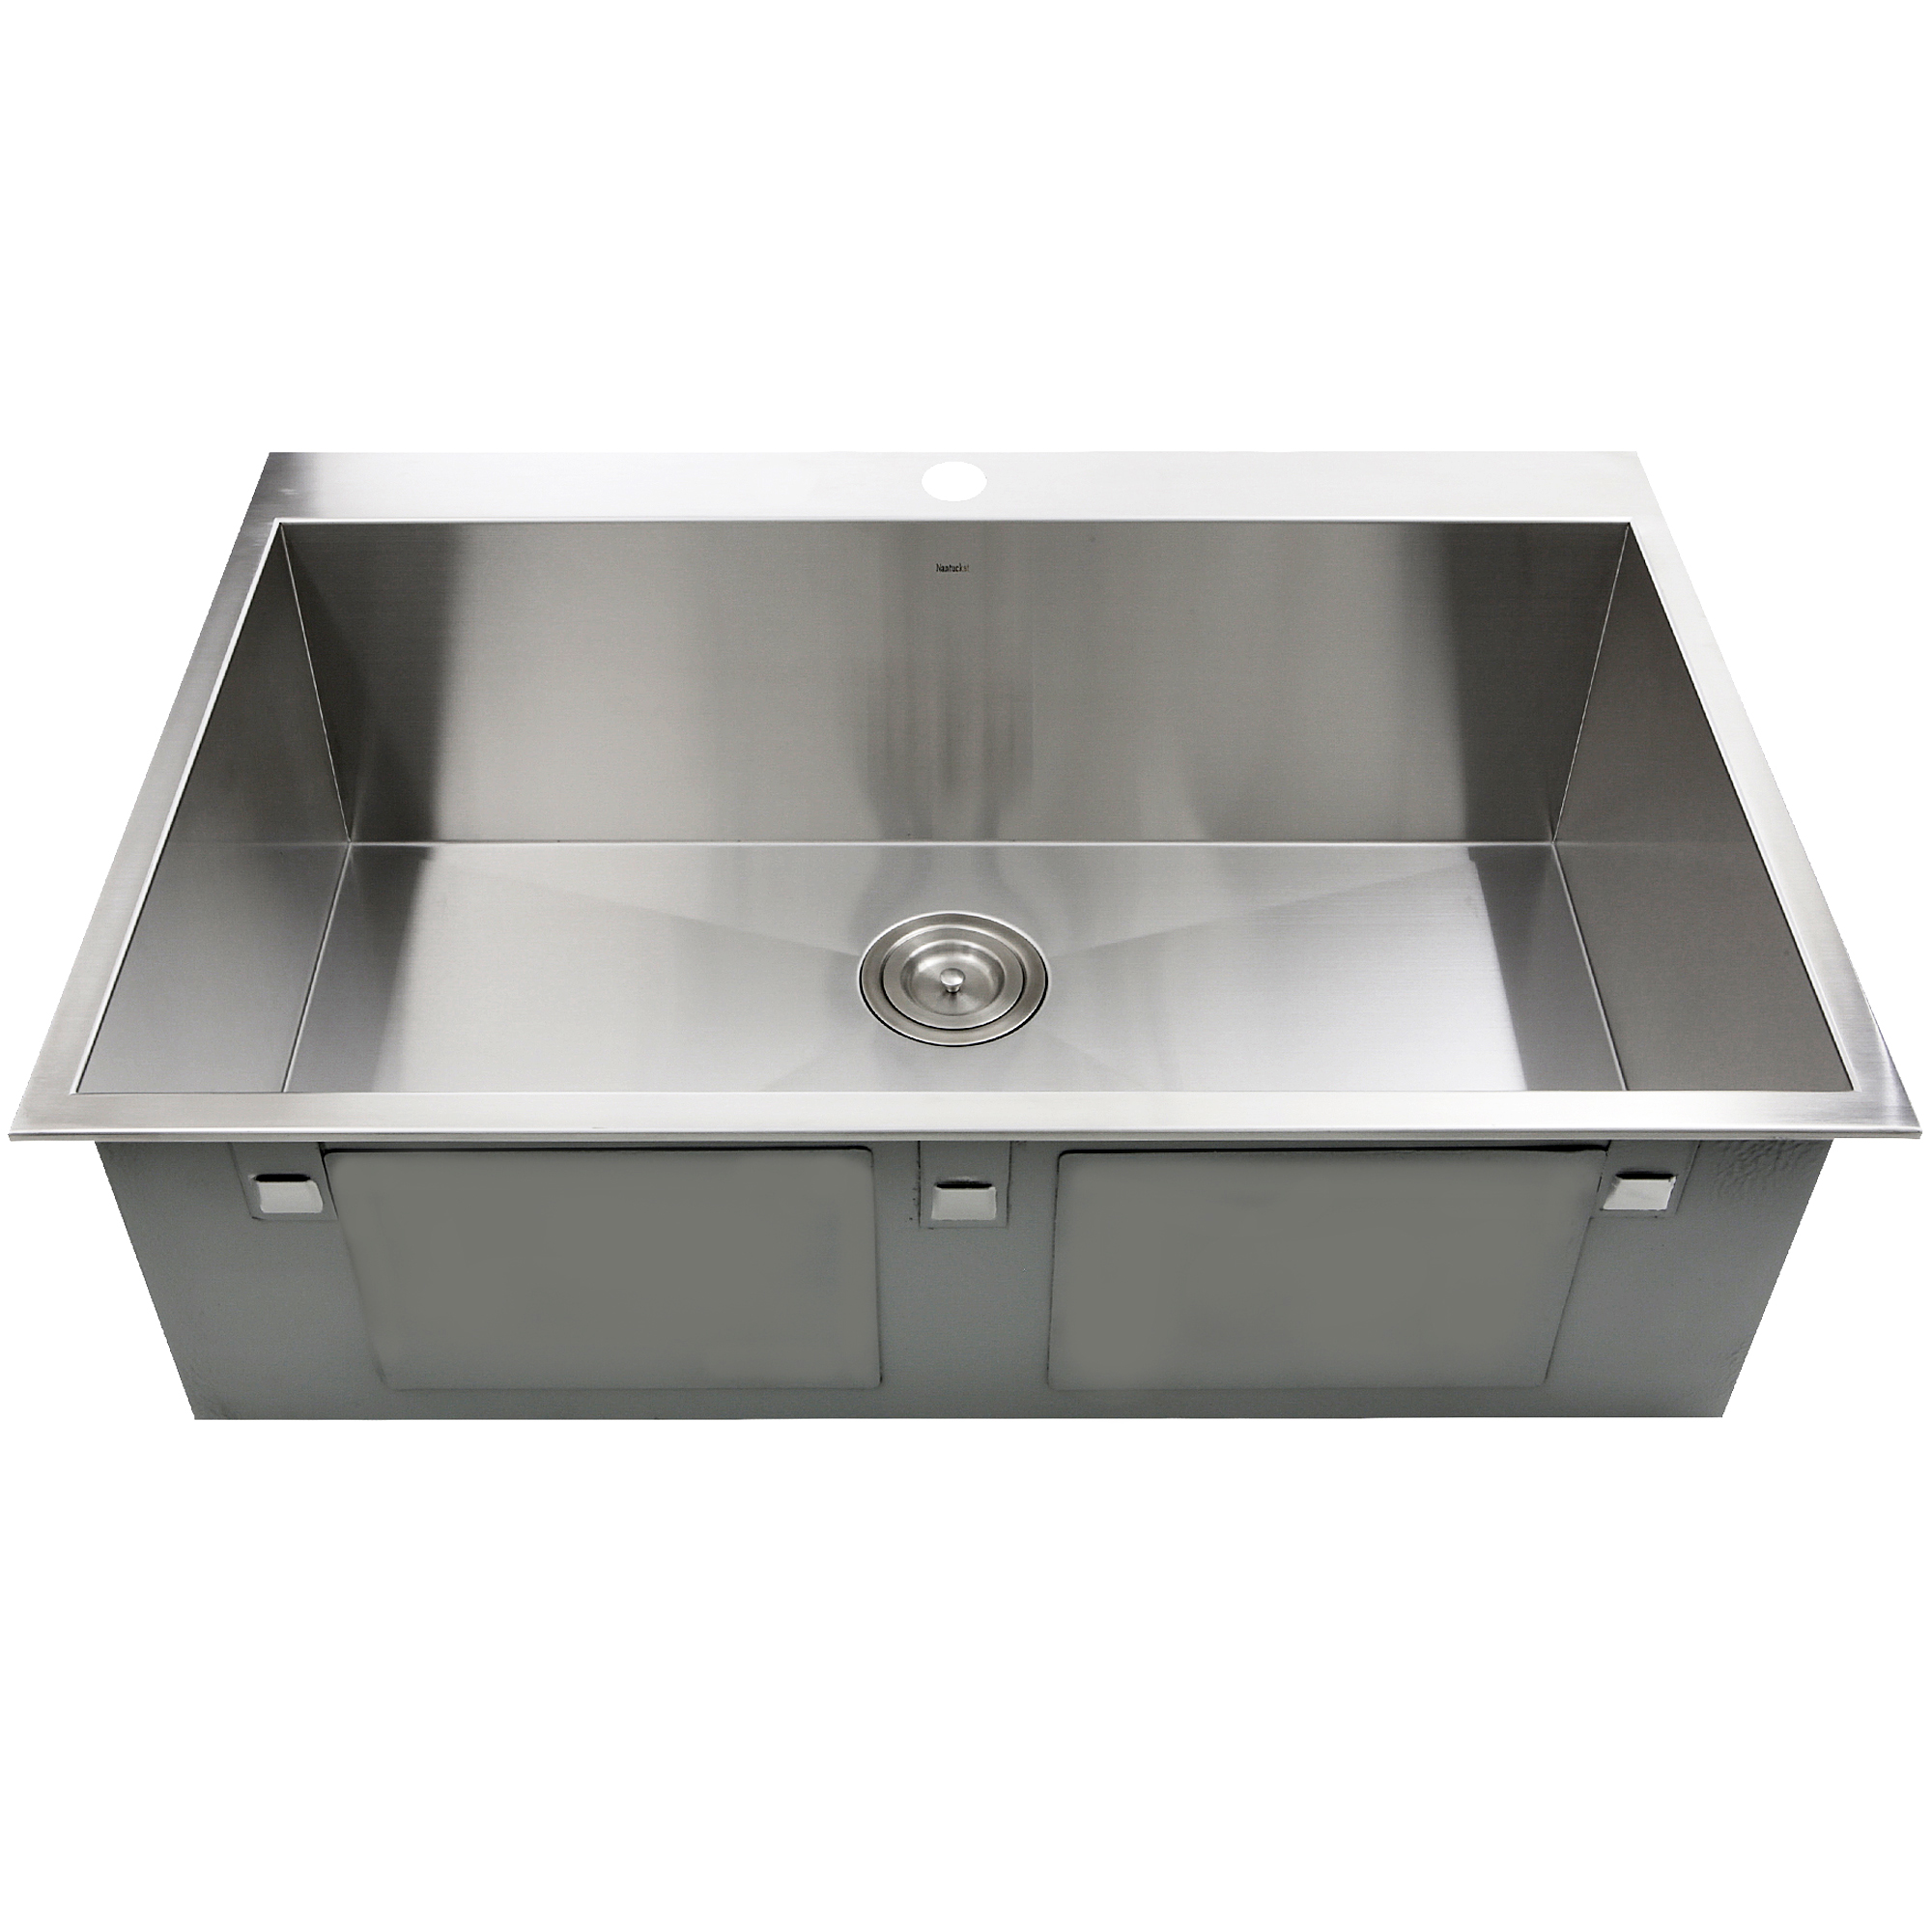 Nantucket Sinks ZR3322-S-16 Self Rimming Stainless Steel Kitchen Sink - image 4 of 7